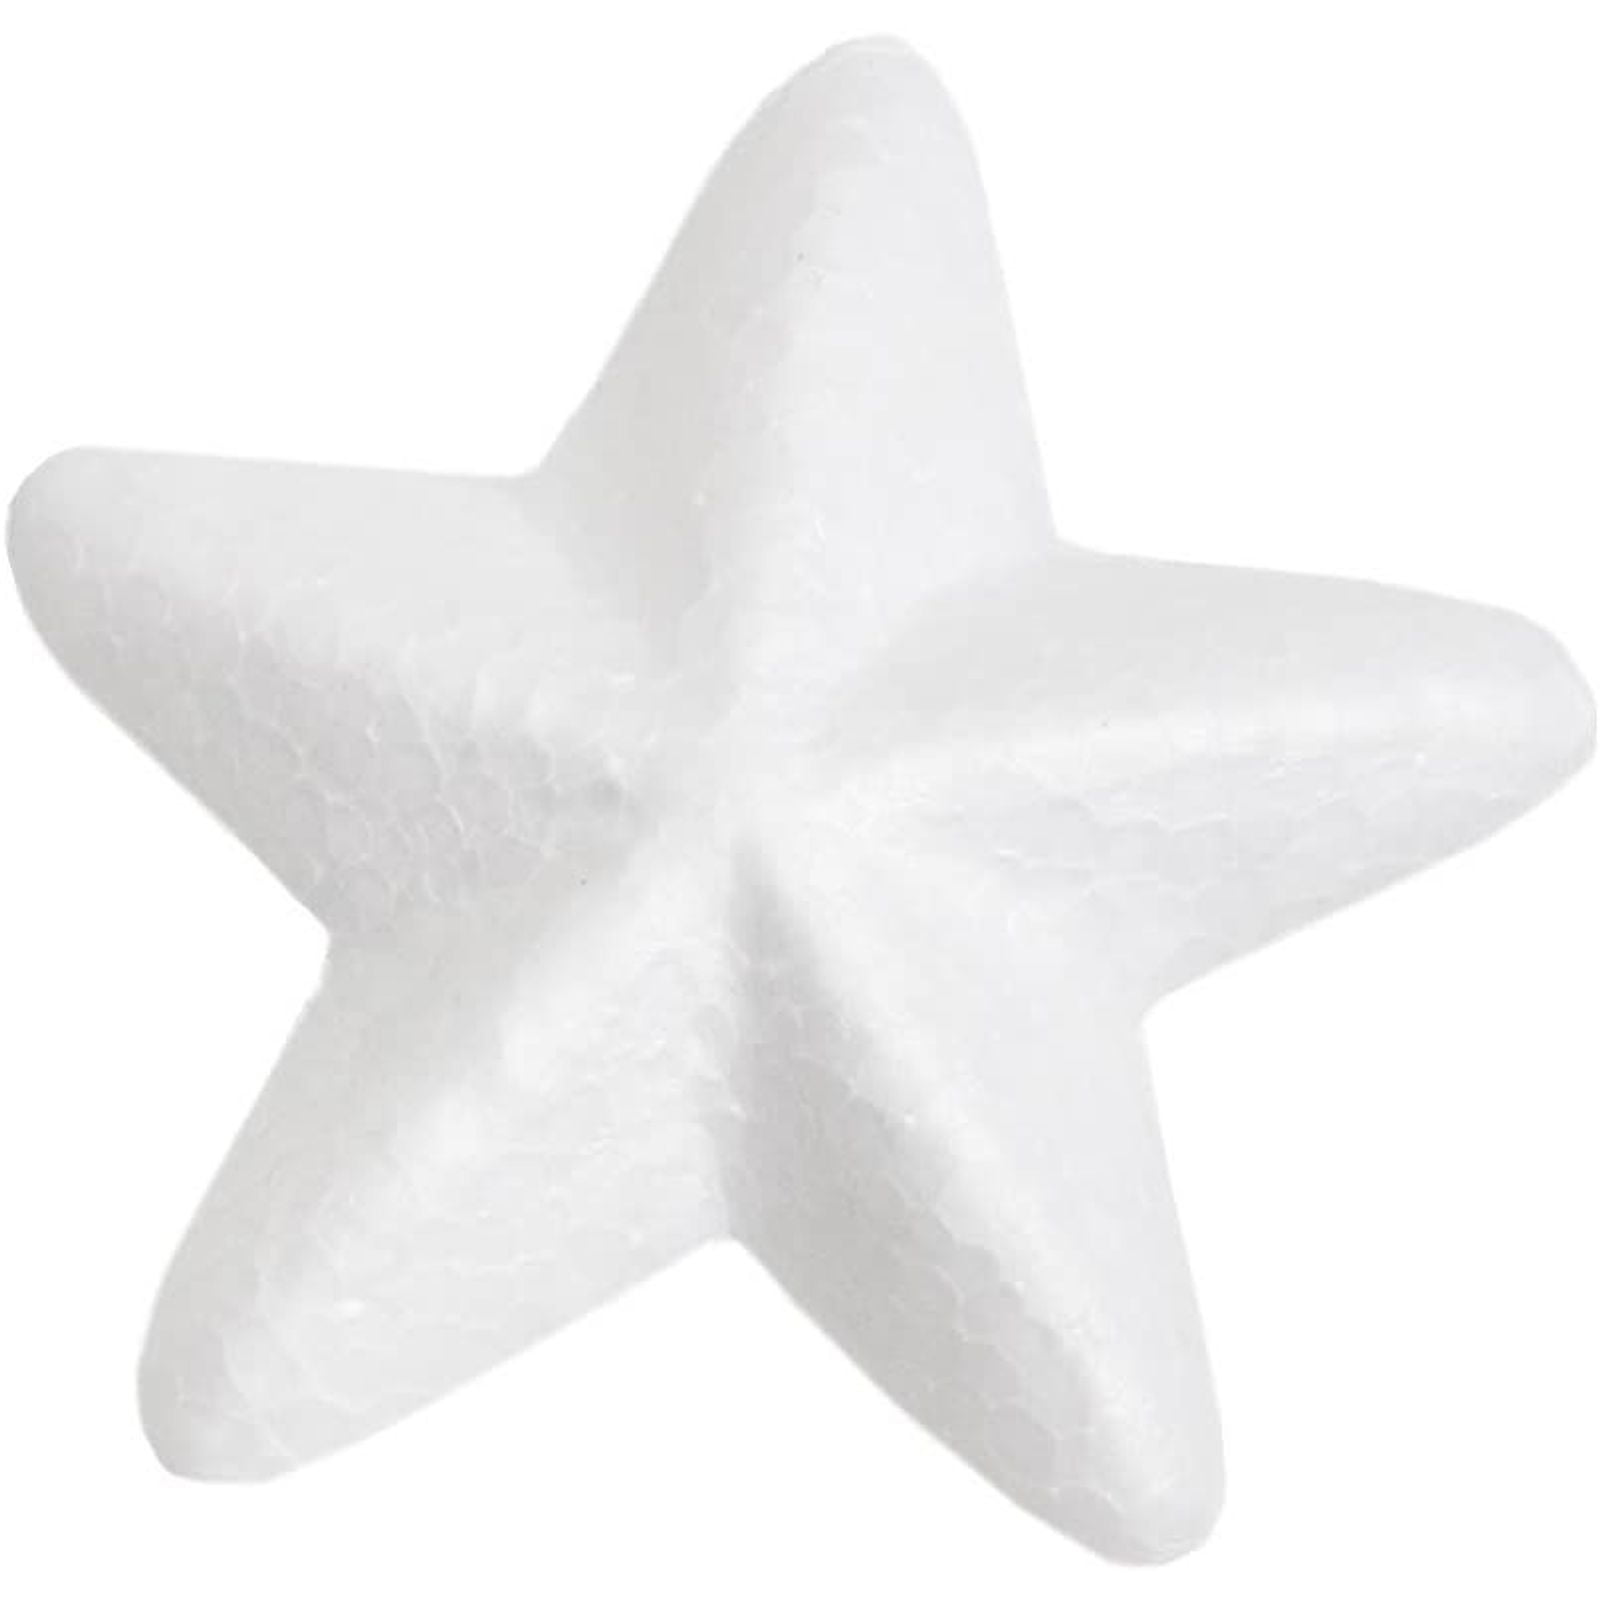 2.3 x 0.875 x 2.3 inches Makes DIY Ornaments and Decorations White 24-Piece Star-Shaped Polystyrene Foam for Arts and Craft Use Craft Foam Stars